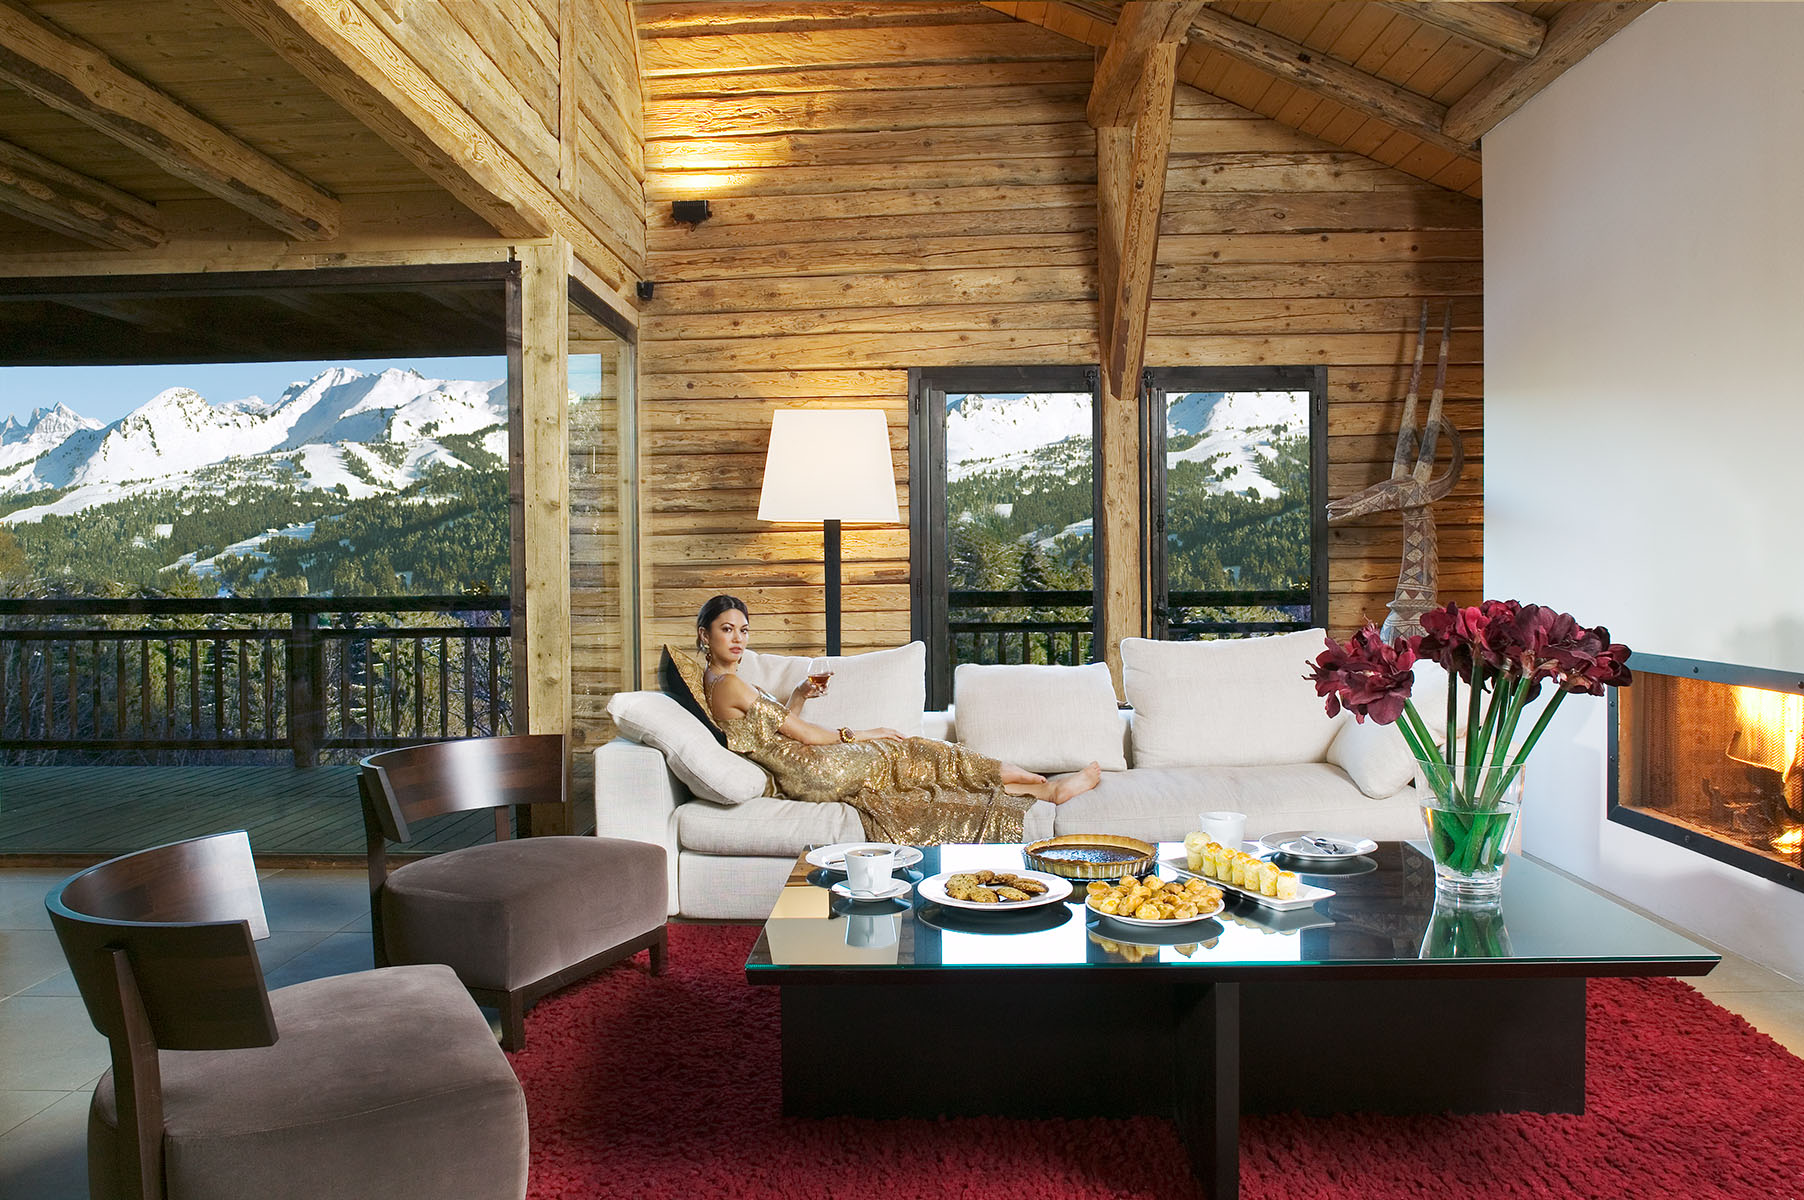 Luxury travel feature of timber chalet in picturesque alpine setting. Interior Design by Nicky DobreeClient: Telegraph Group